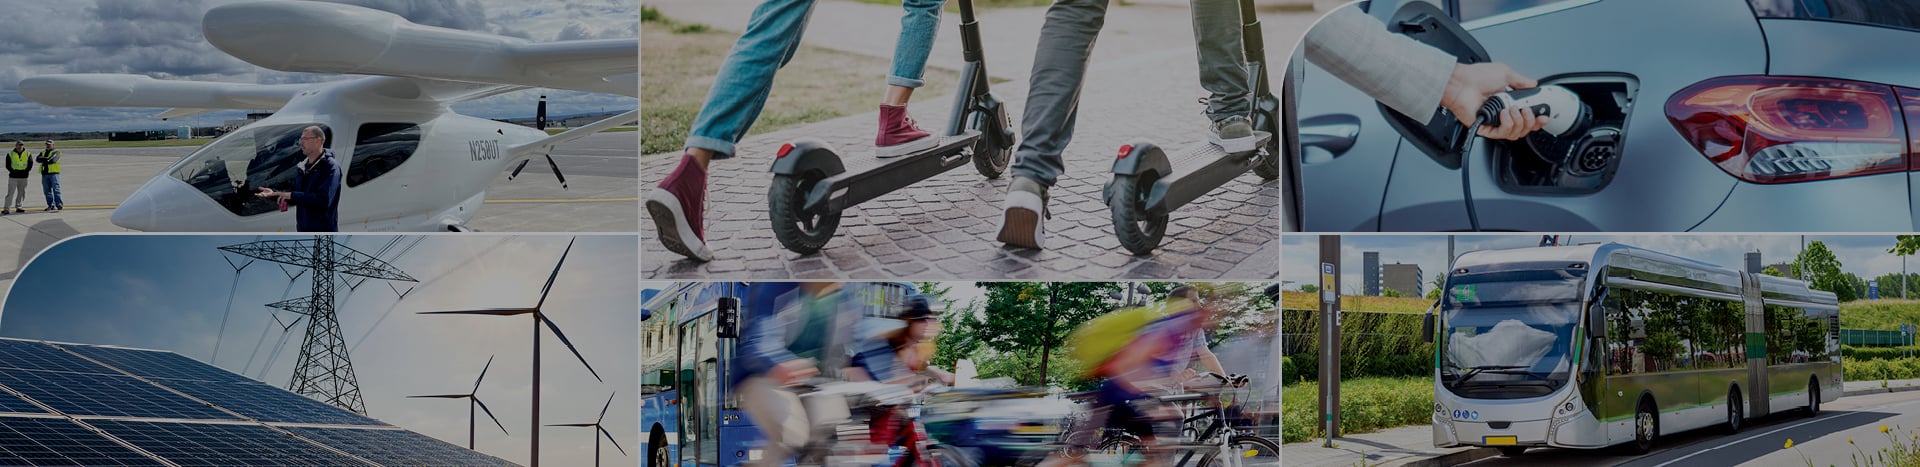 Multiple electric vehicle modes, including cars, buses, e-bikes, e-scooters, and advanced air mobility.  